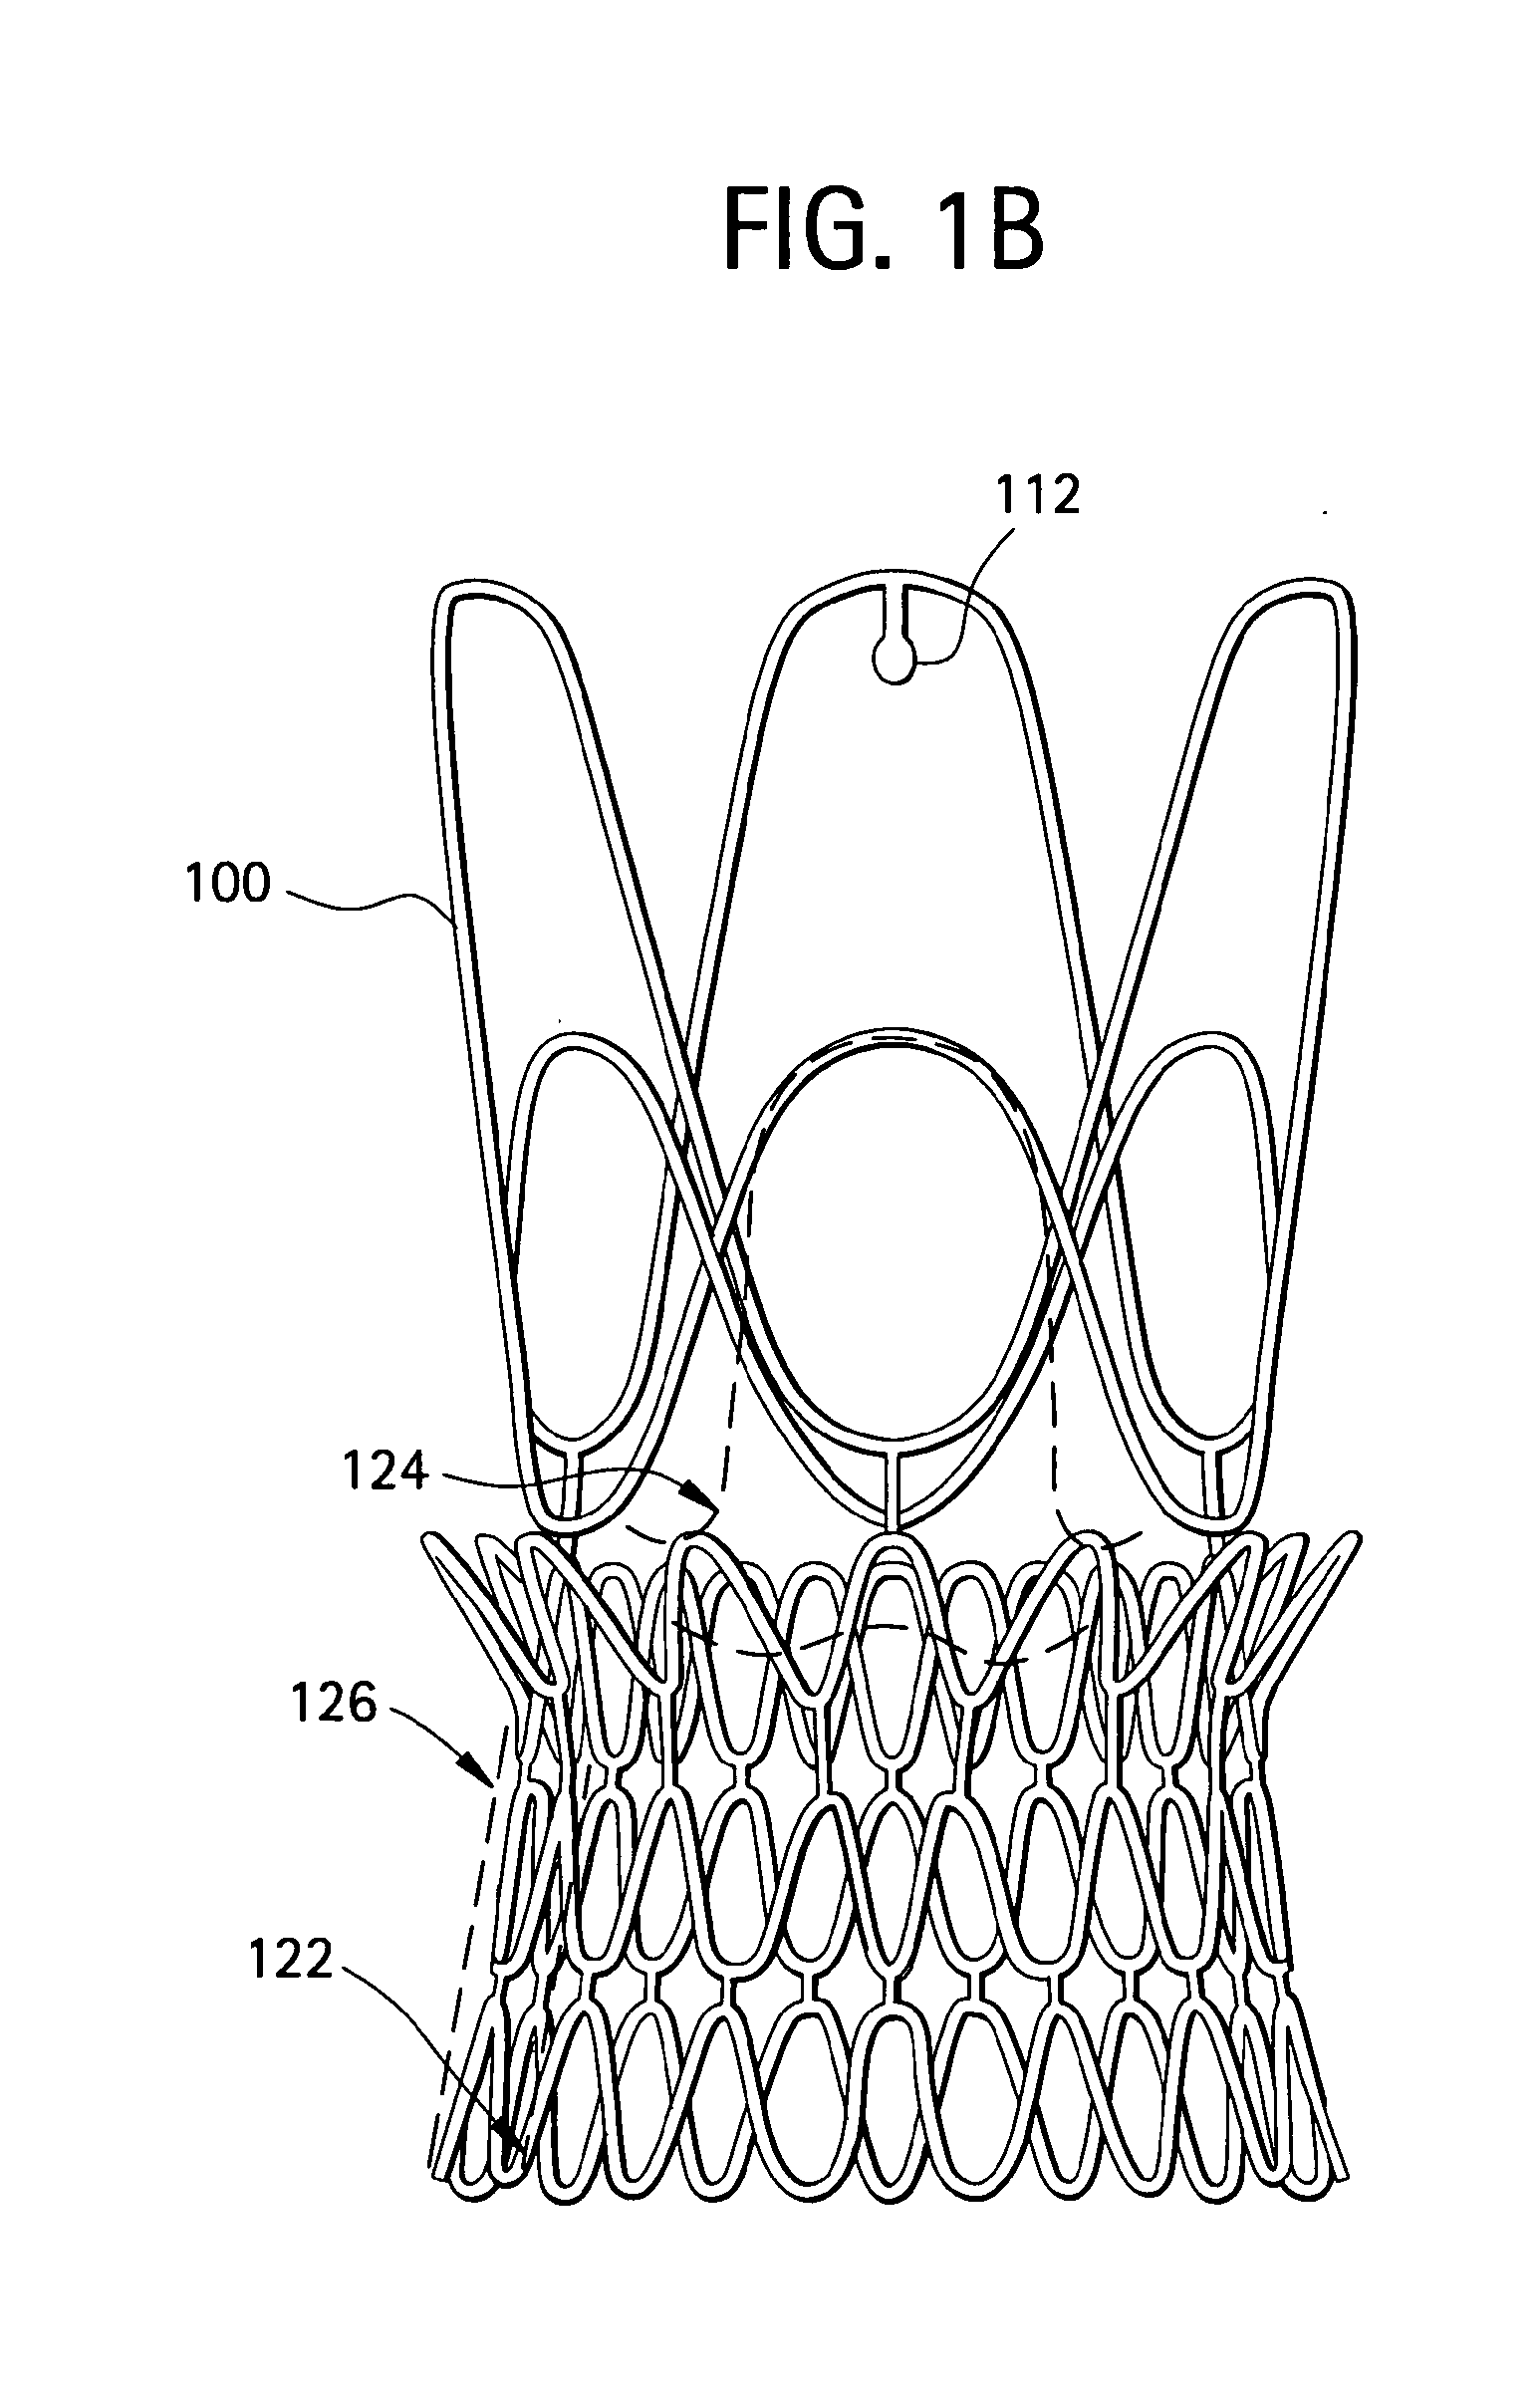 Stents, Valved-Stents, and Methods and Systems for Delivery Thereof